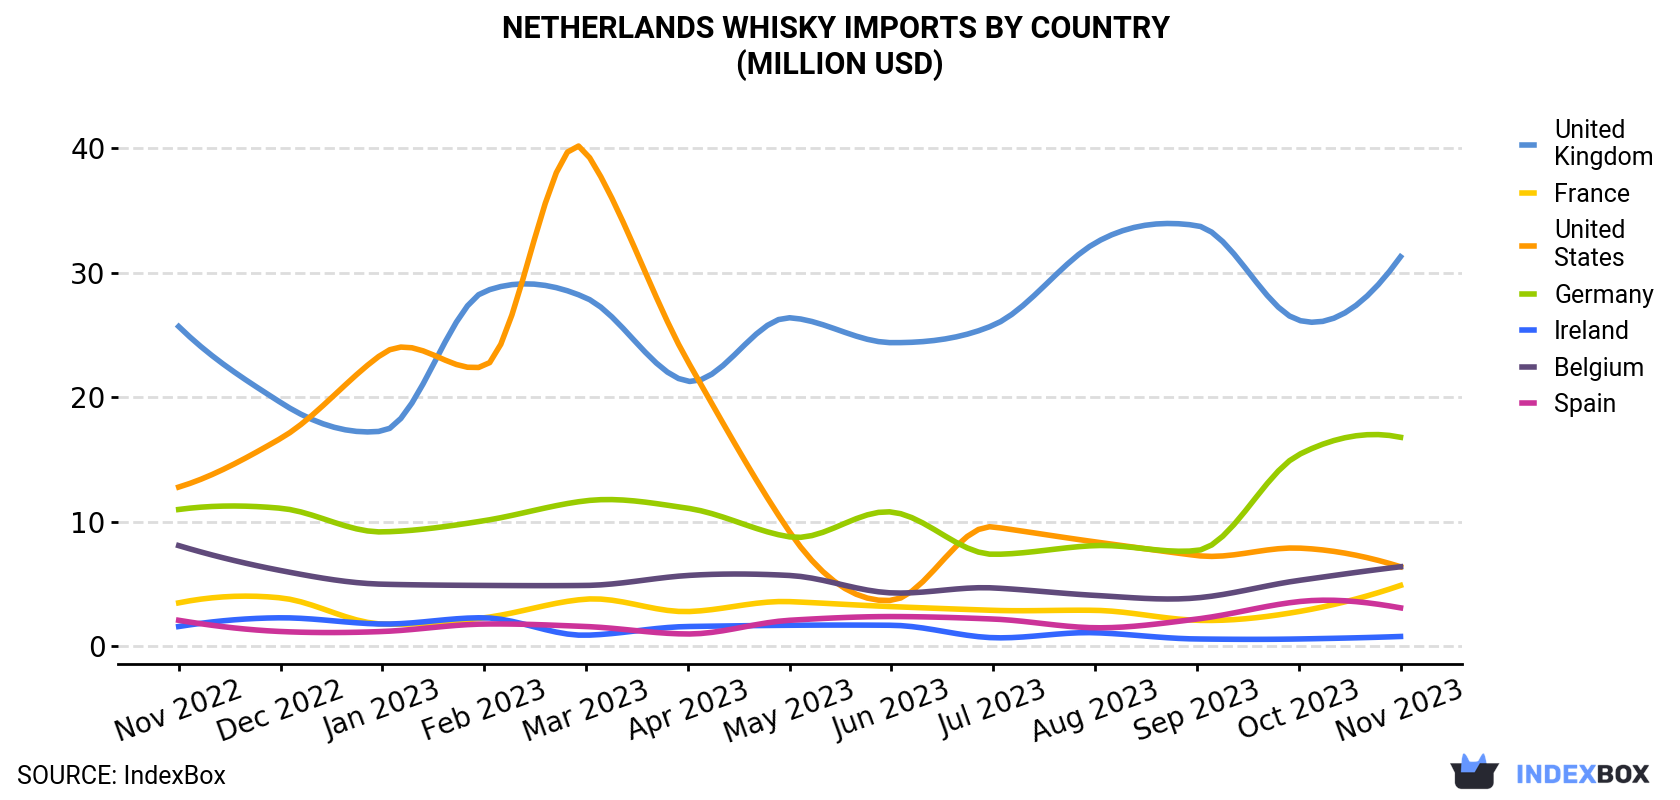 Netherlands Whisky Imports By Country (Million USD)